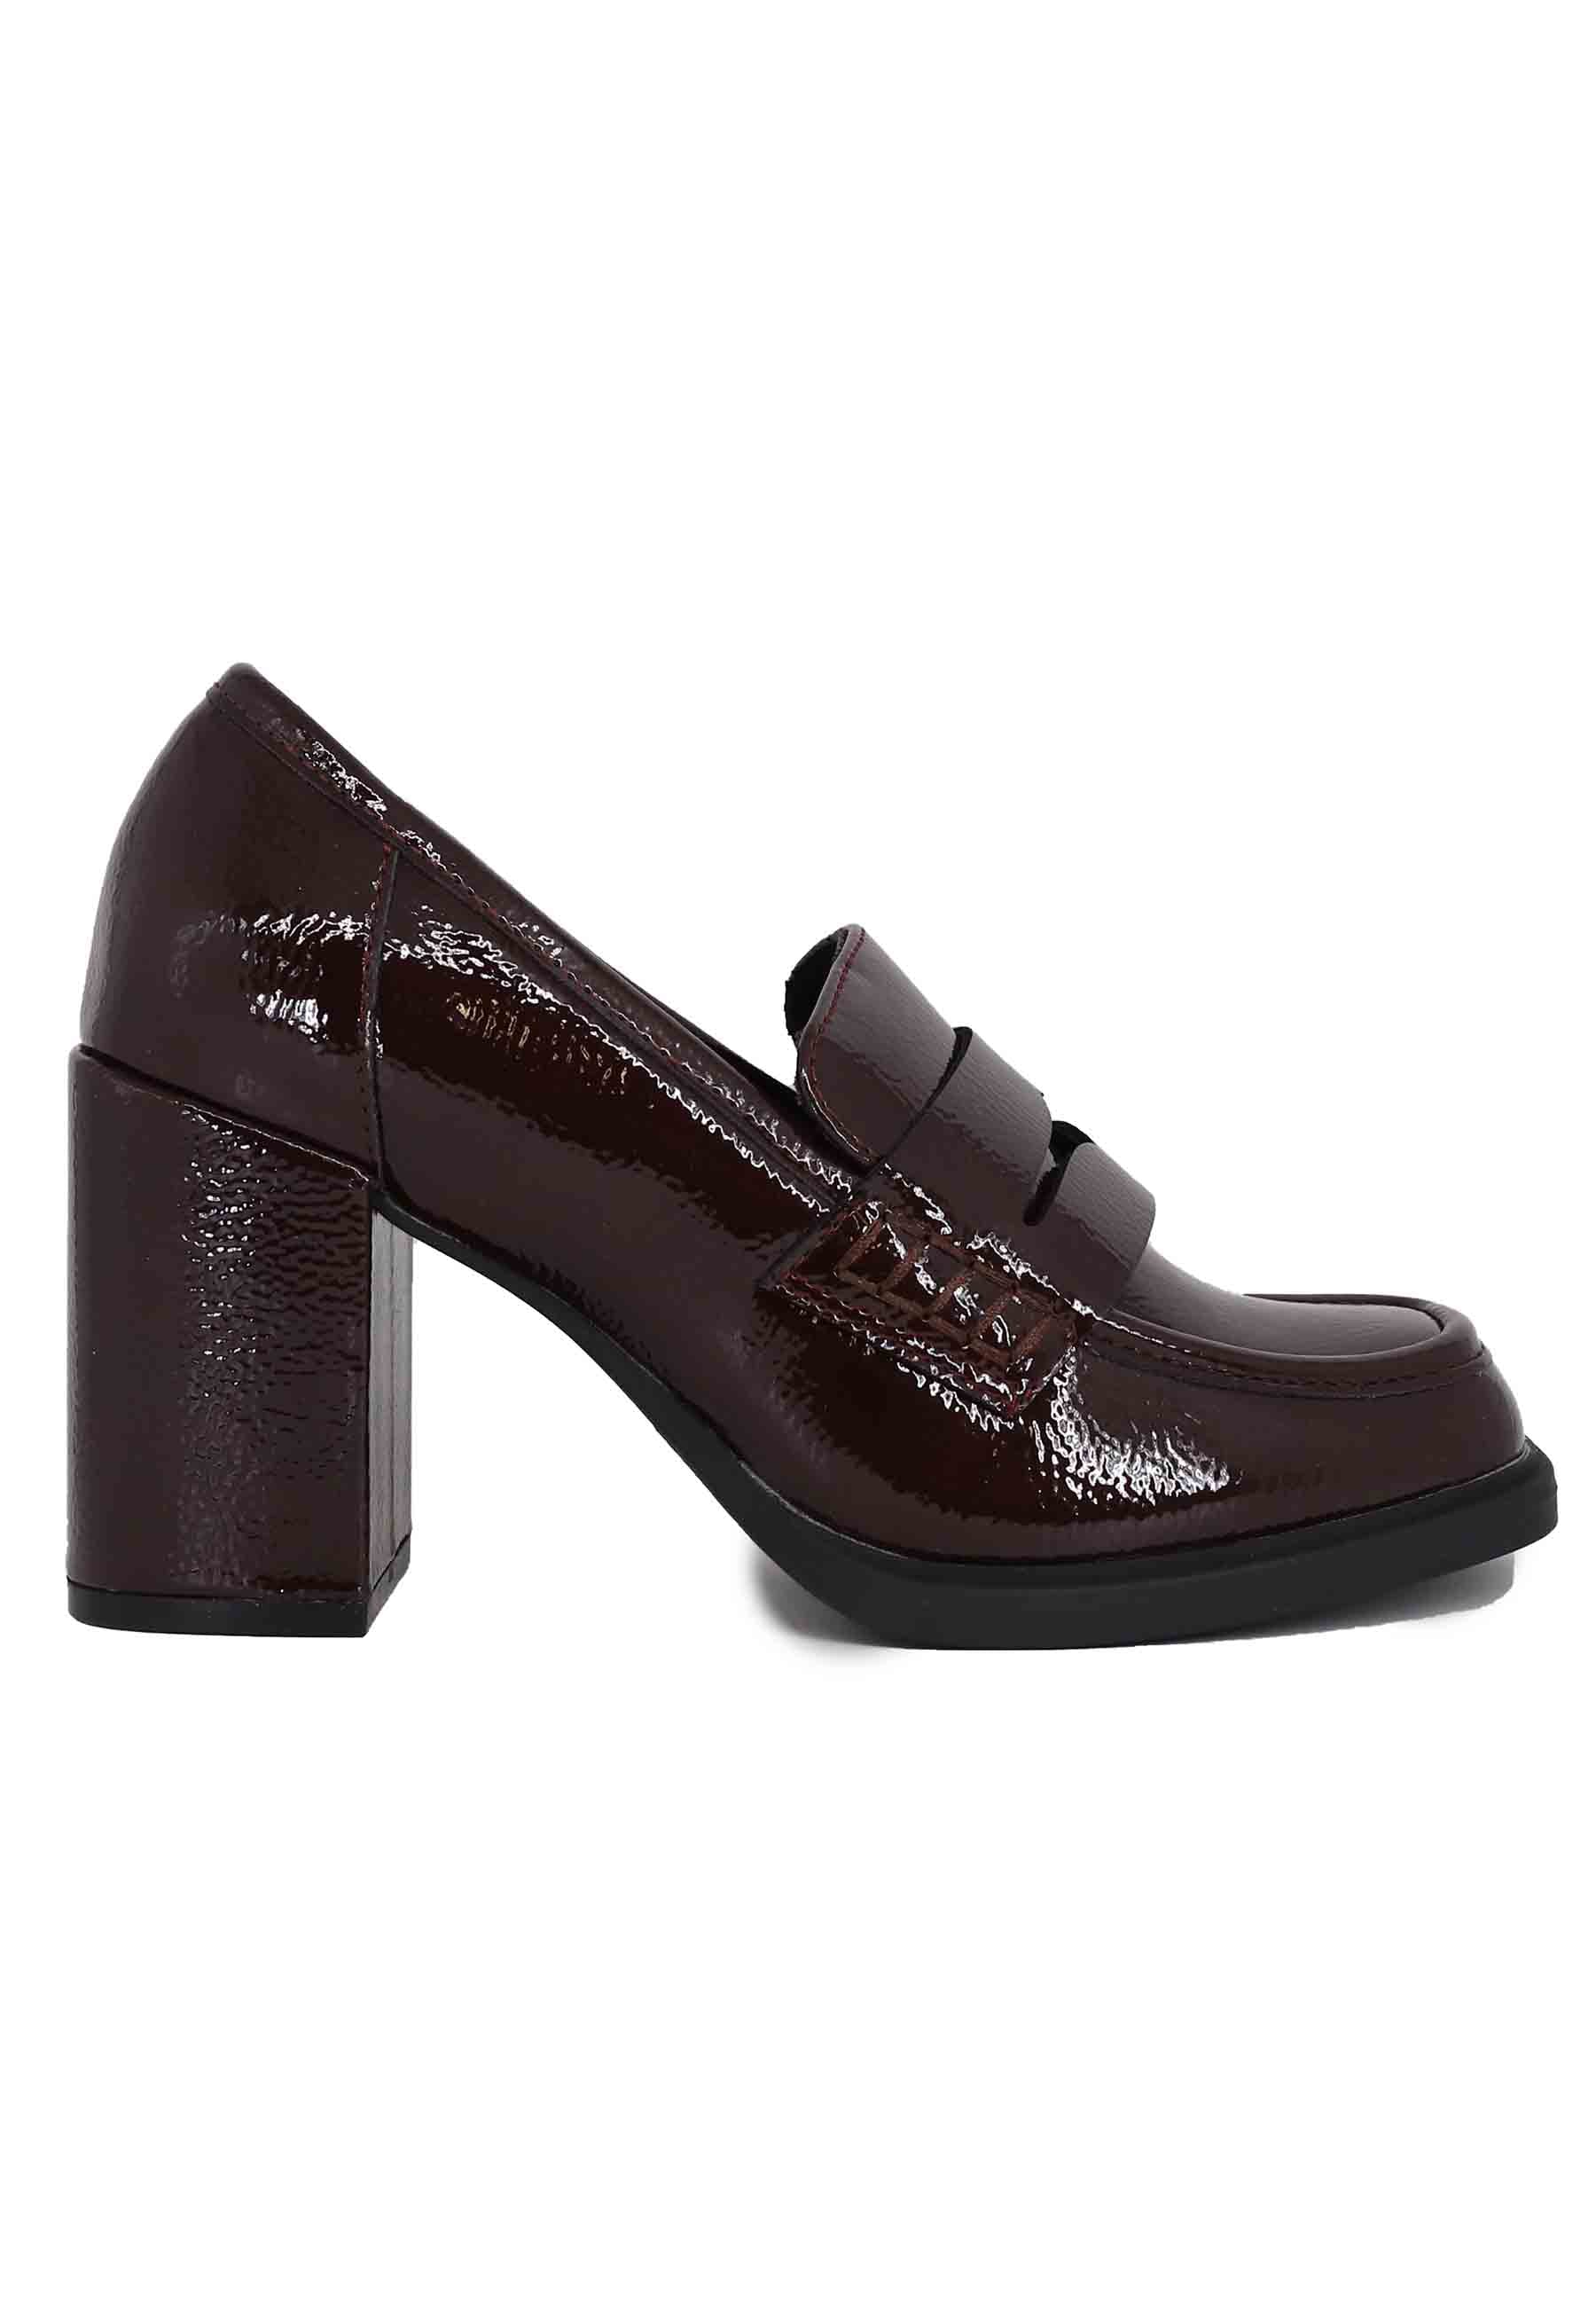 Women's burgundy patent moccasins with high heel and round toe